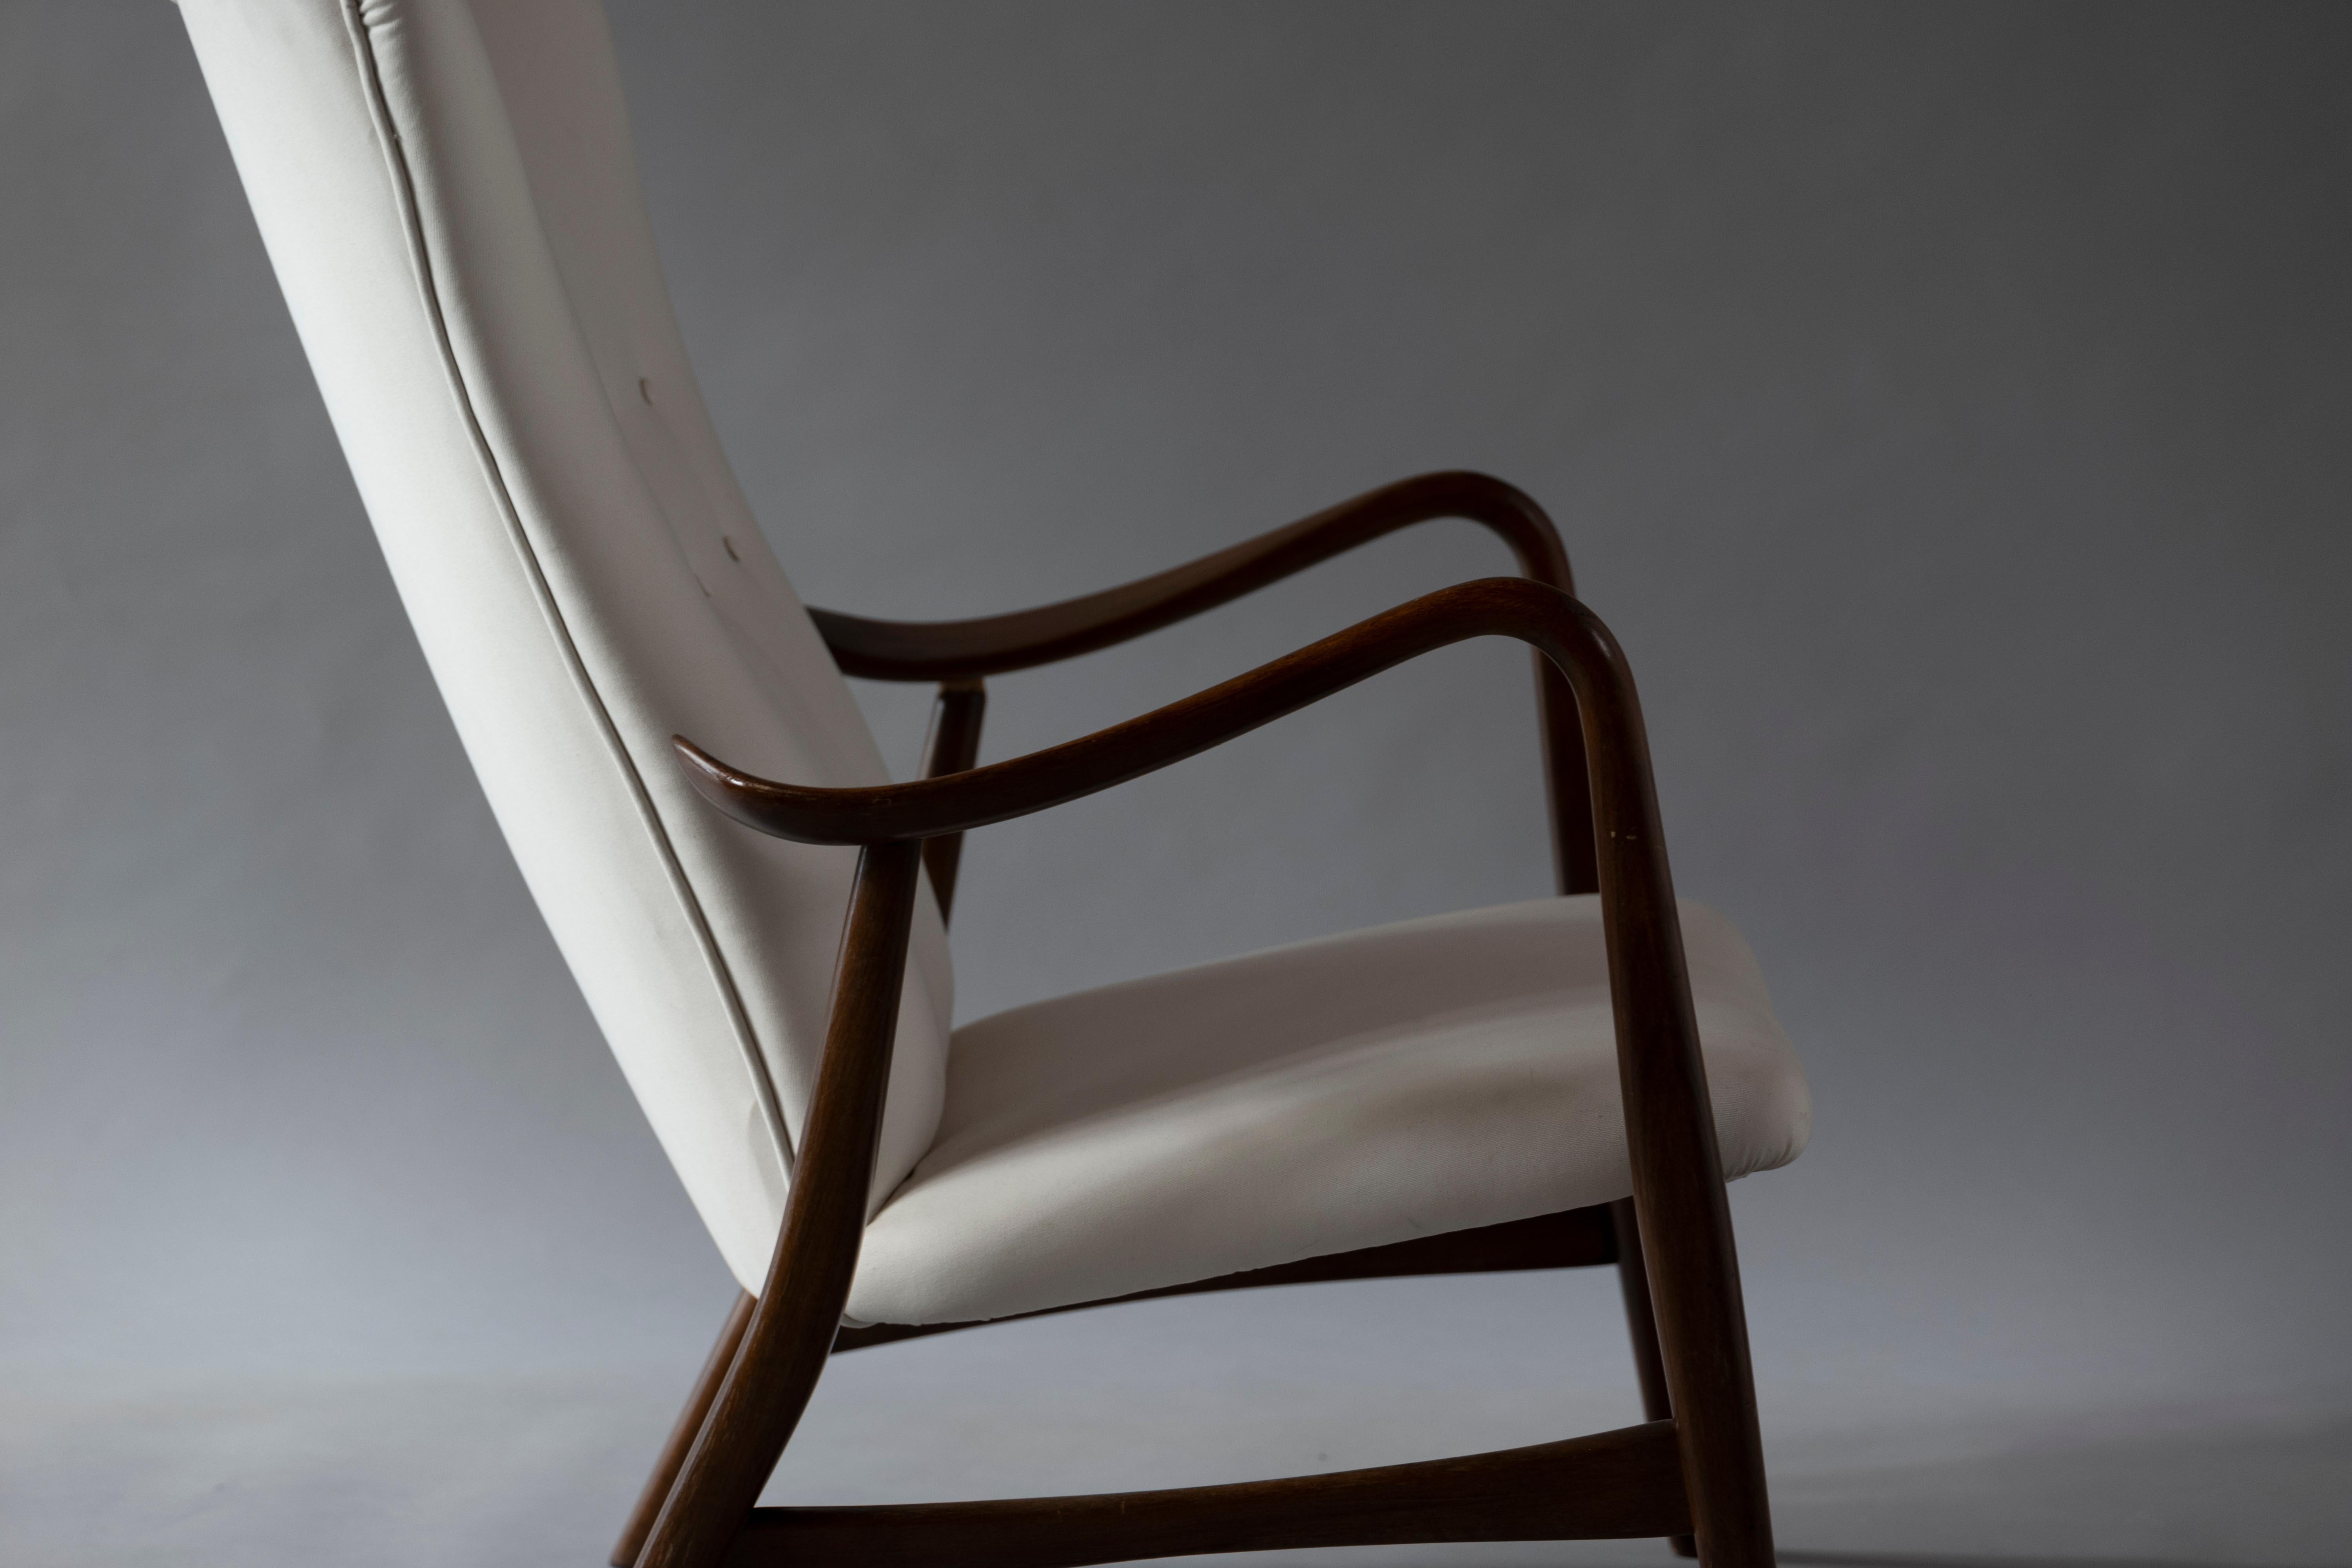 Sculpural wingback lounge chair designed by Schubell & Madsen, Denmark 1950s, curvilinear walnut-stained beechwood frame and armrest, upholstered in white Kvadrat fabric.